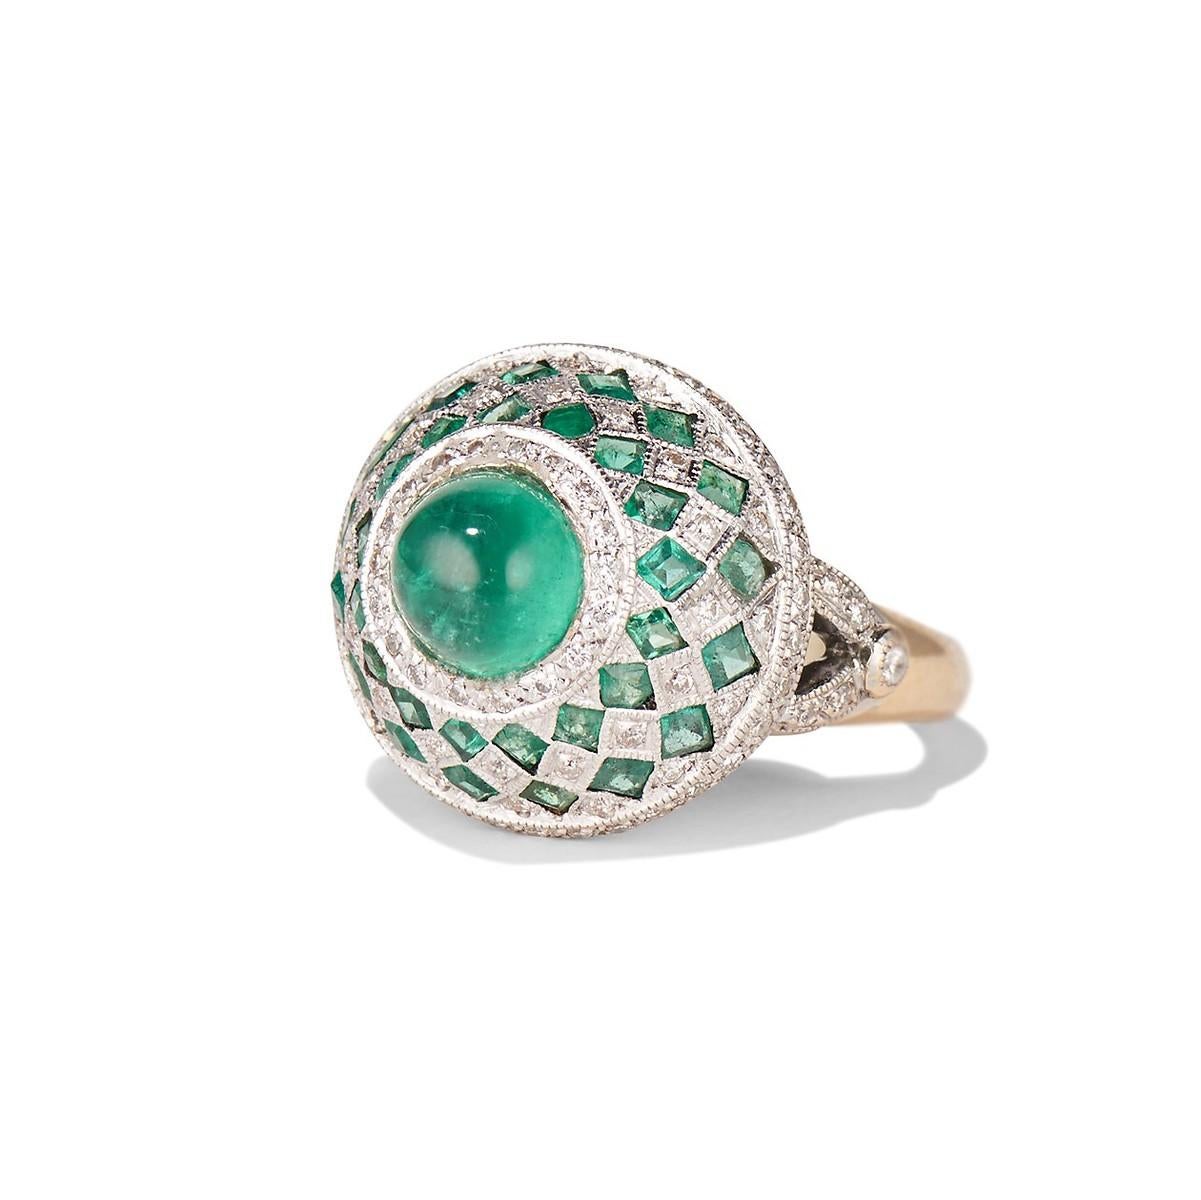 Vintage emerald cabochon and diamond fancy cocktail ring by David Morris 3